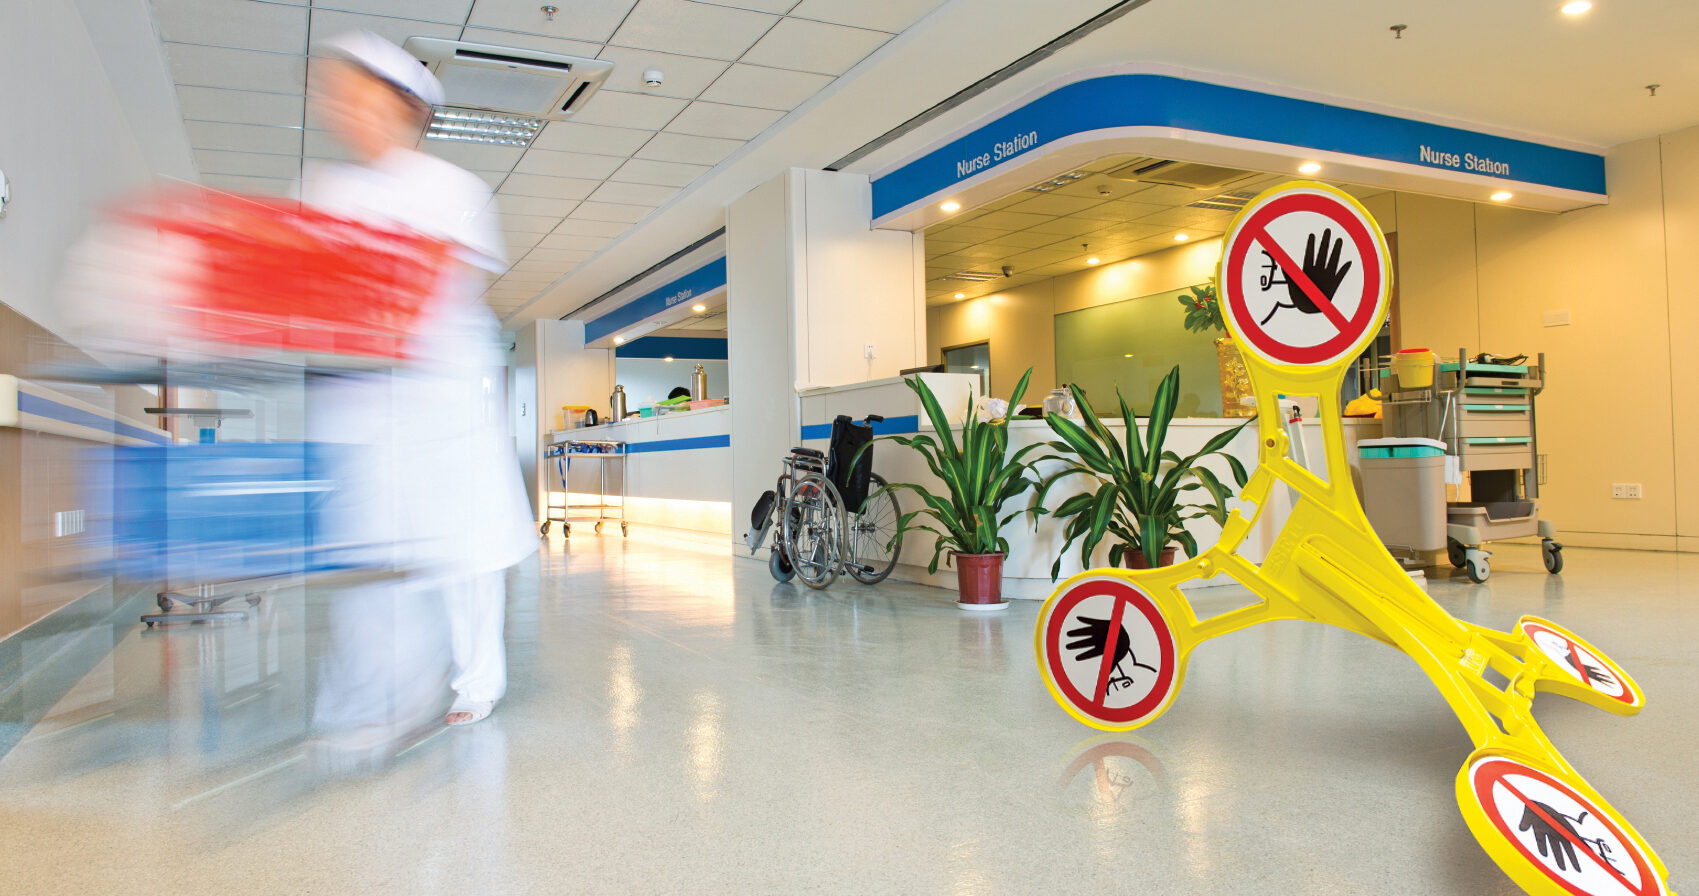 Yellow industrial safety signage by Seton shown in a healthcare medical environment